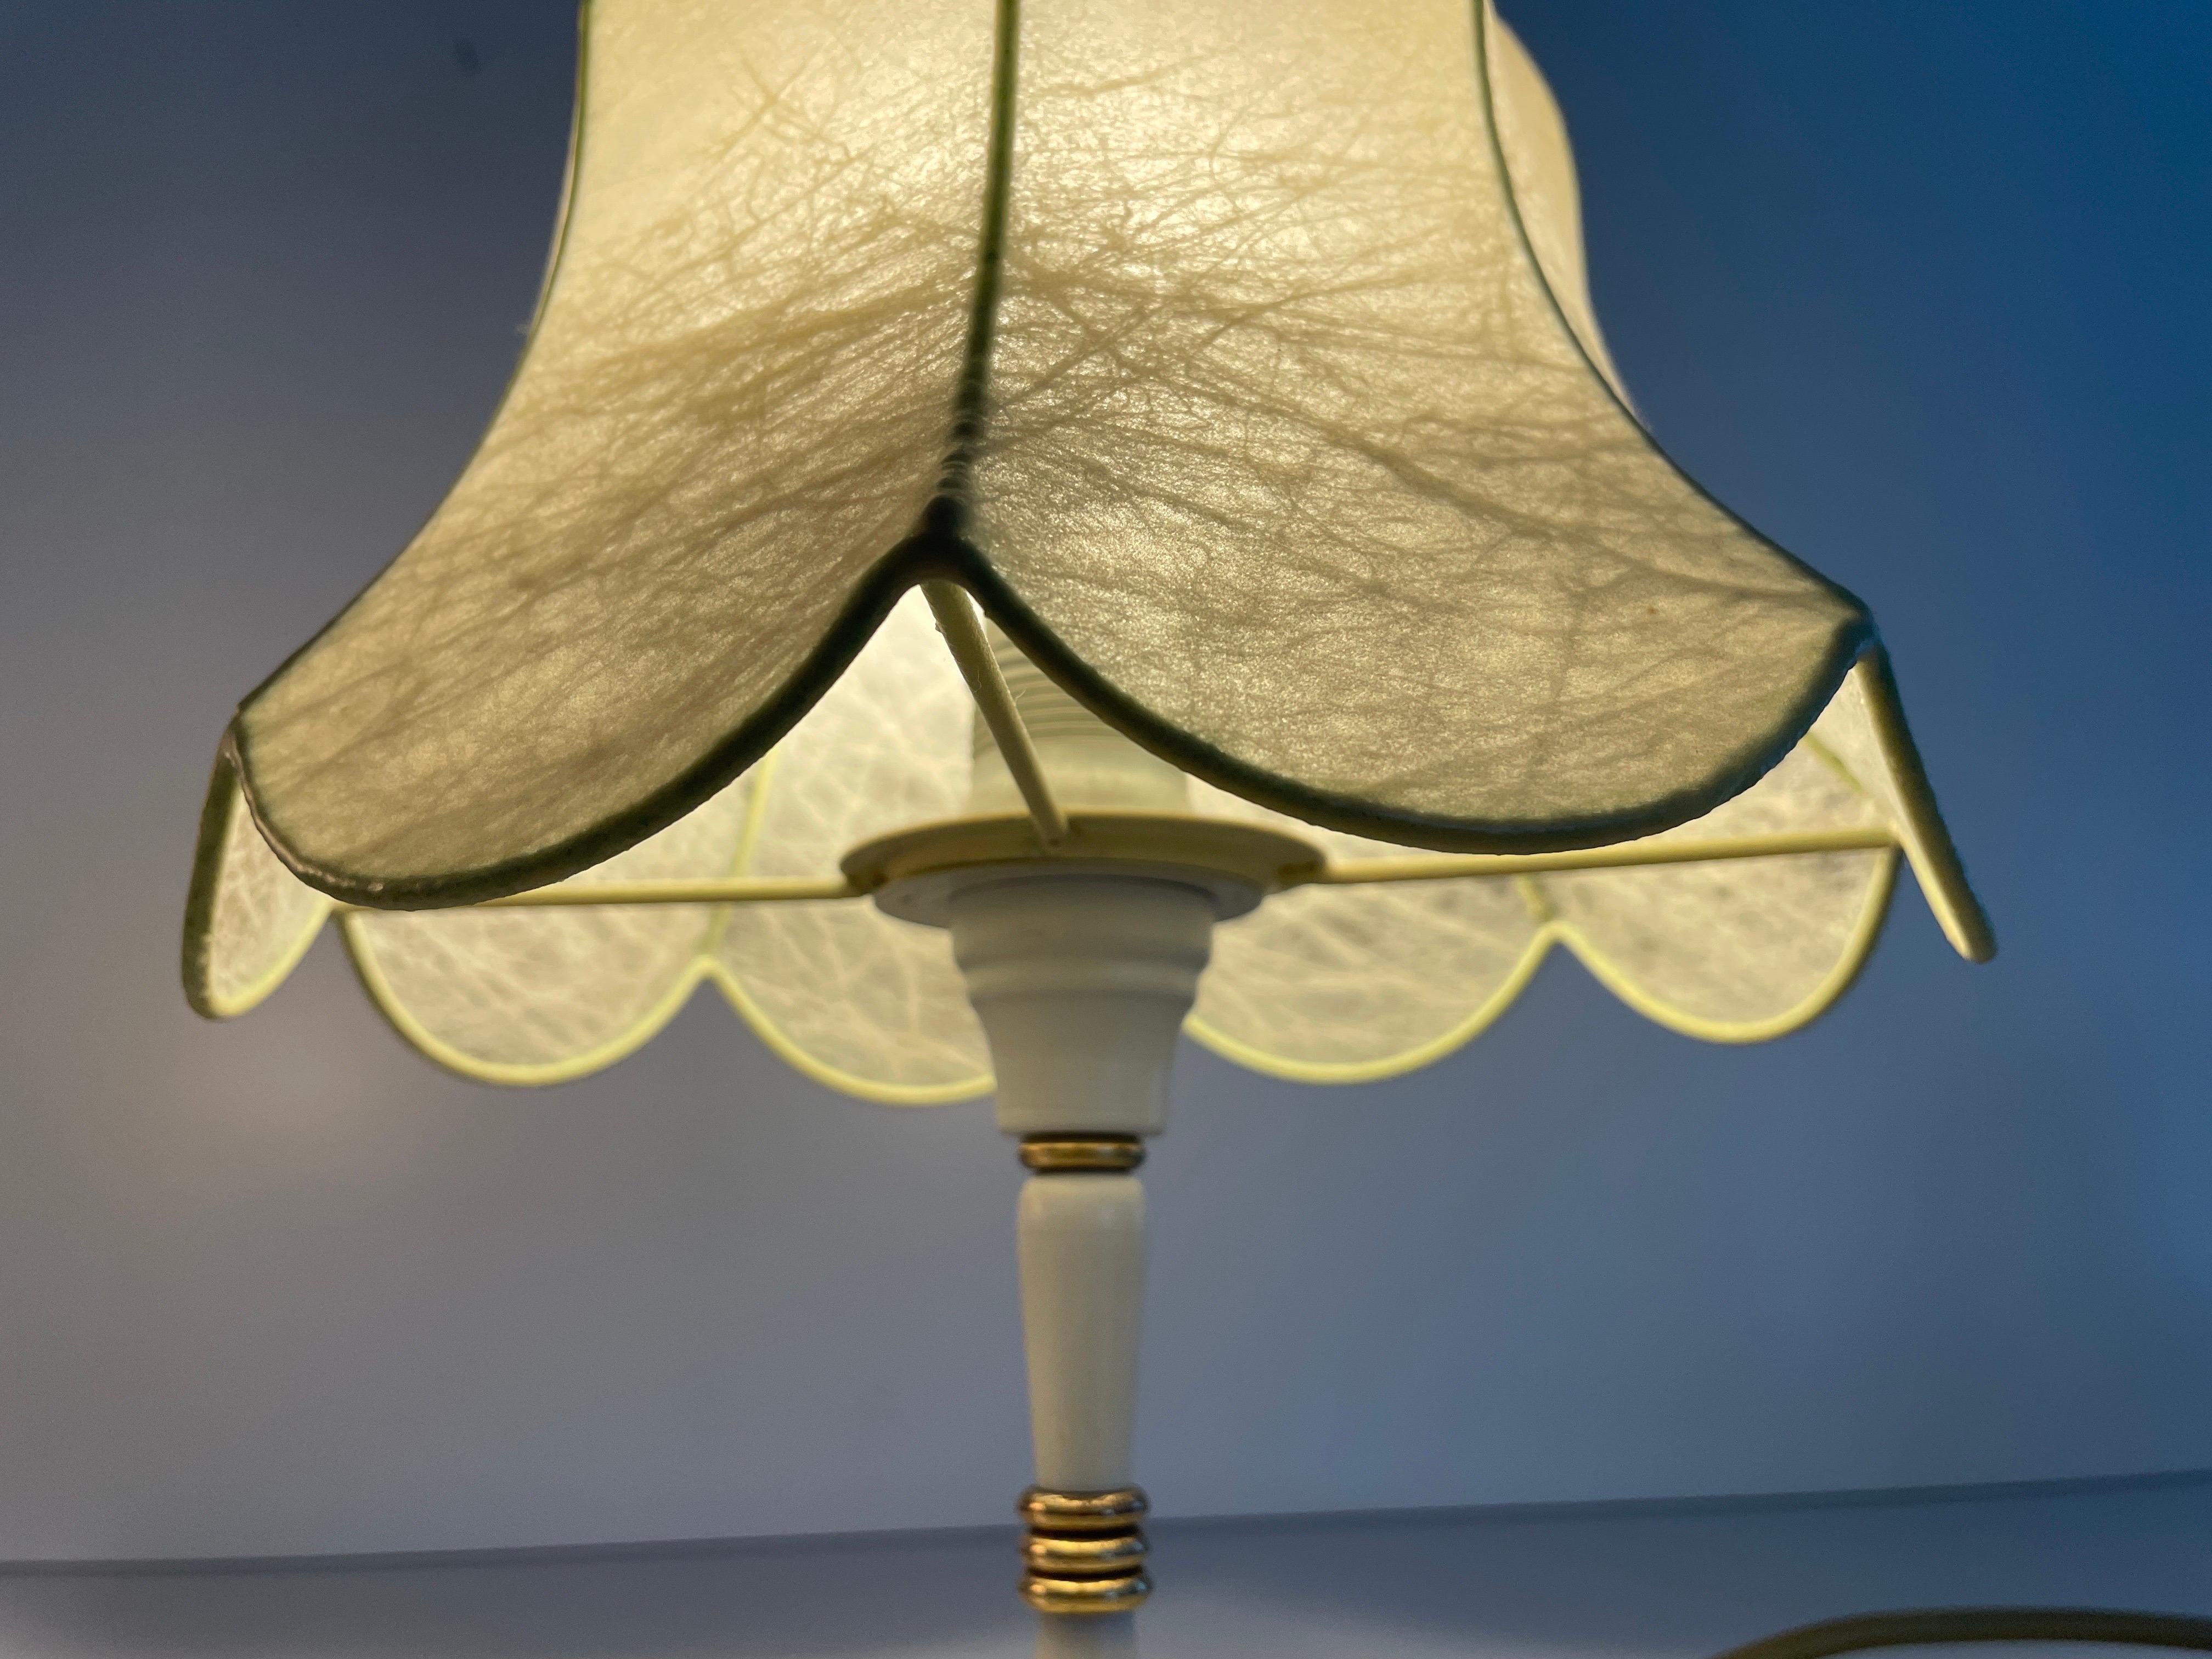 Cocoon Shade Metal Body Pair of Bedside Lamps by GOLDKANT, 1970s, Germany For Sale 12